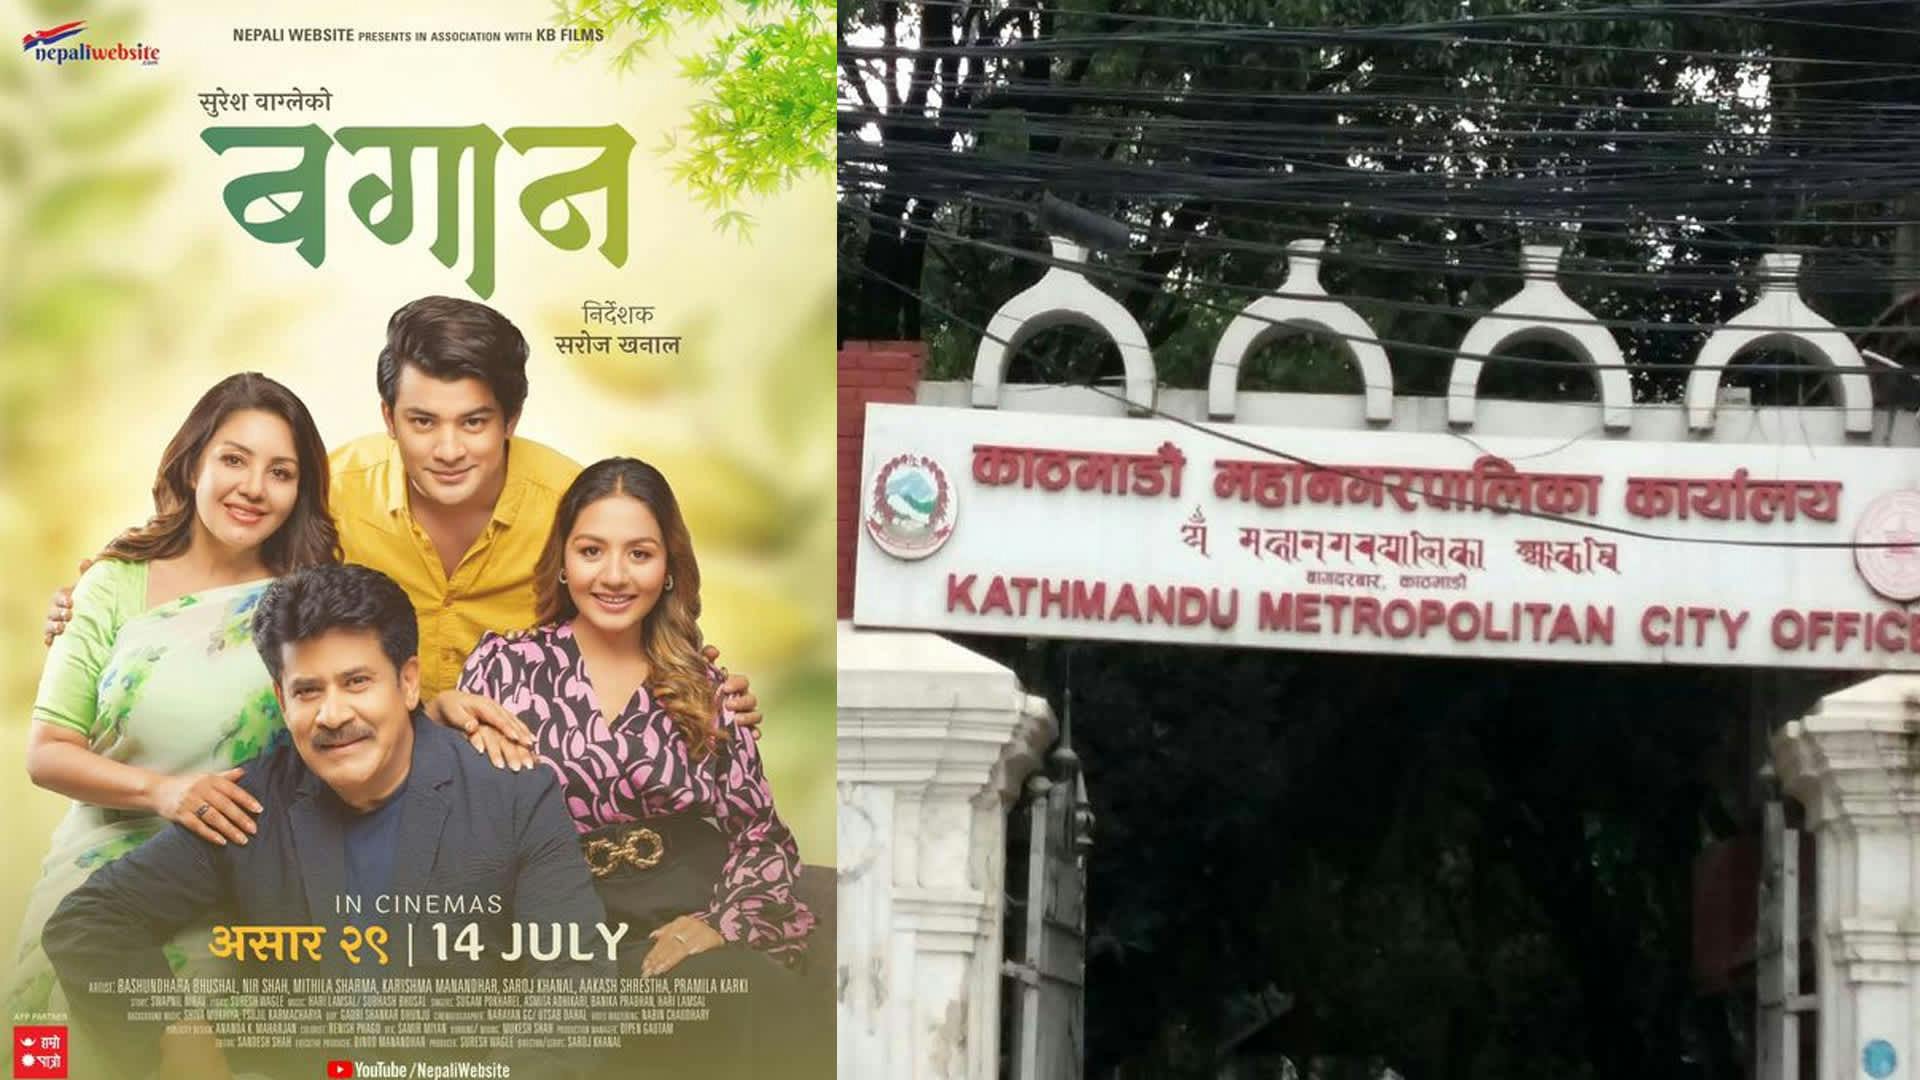 50,000 were fined by the metropolis for the film 'Bagan' after pasting random posters.